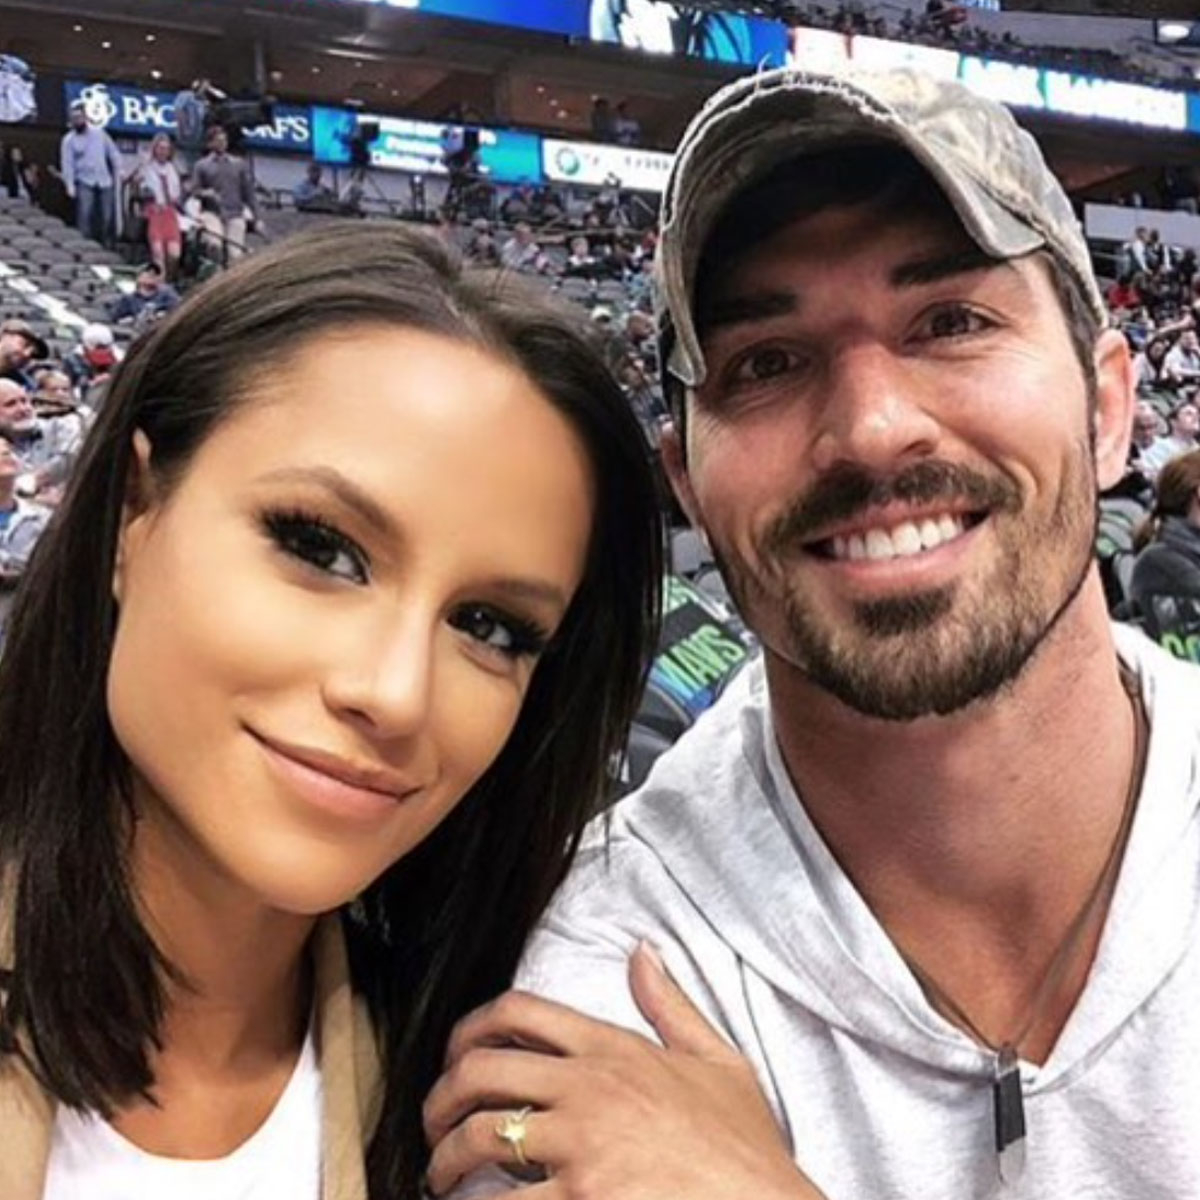 Big Brother’s Jessica Graf and Cody Nickson Welcome Baby No. 3